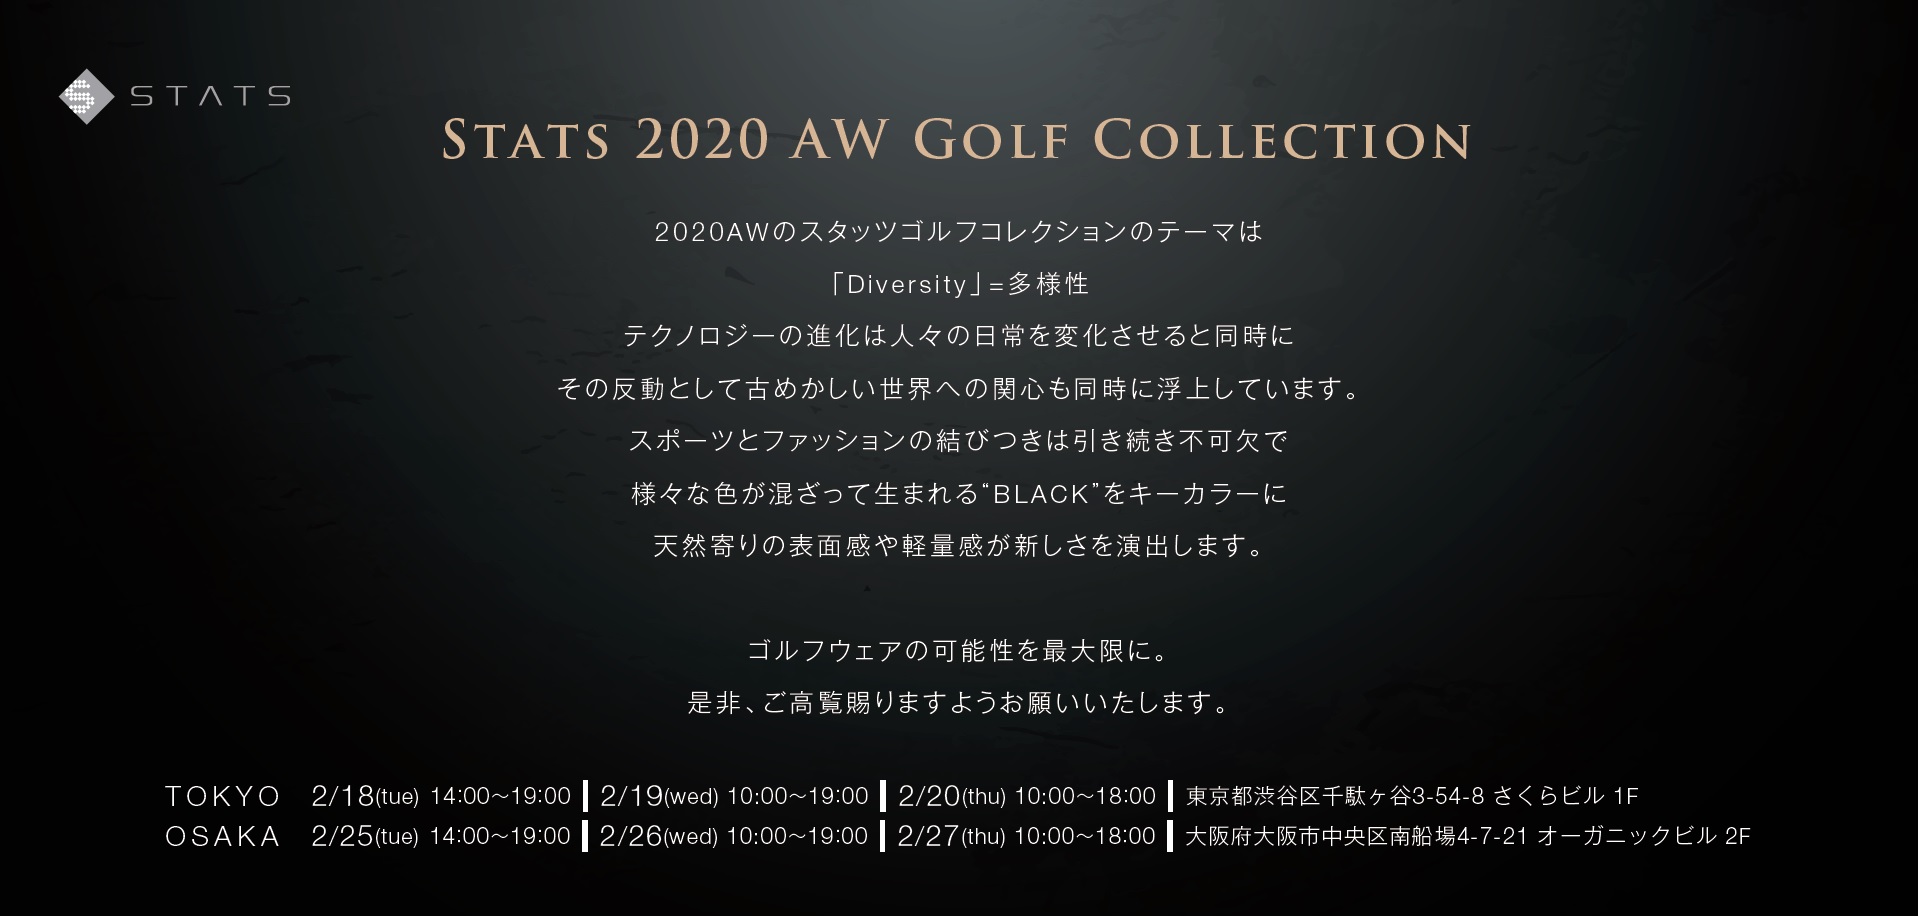 STATS 2020 AW GOLF COLLECTION